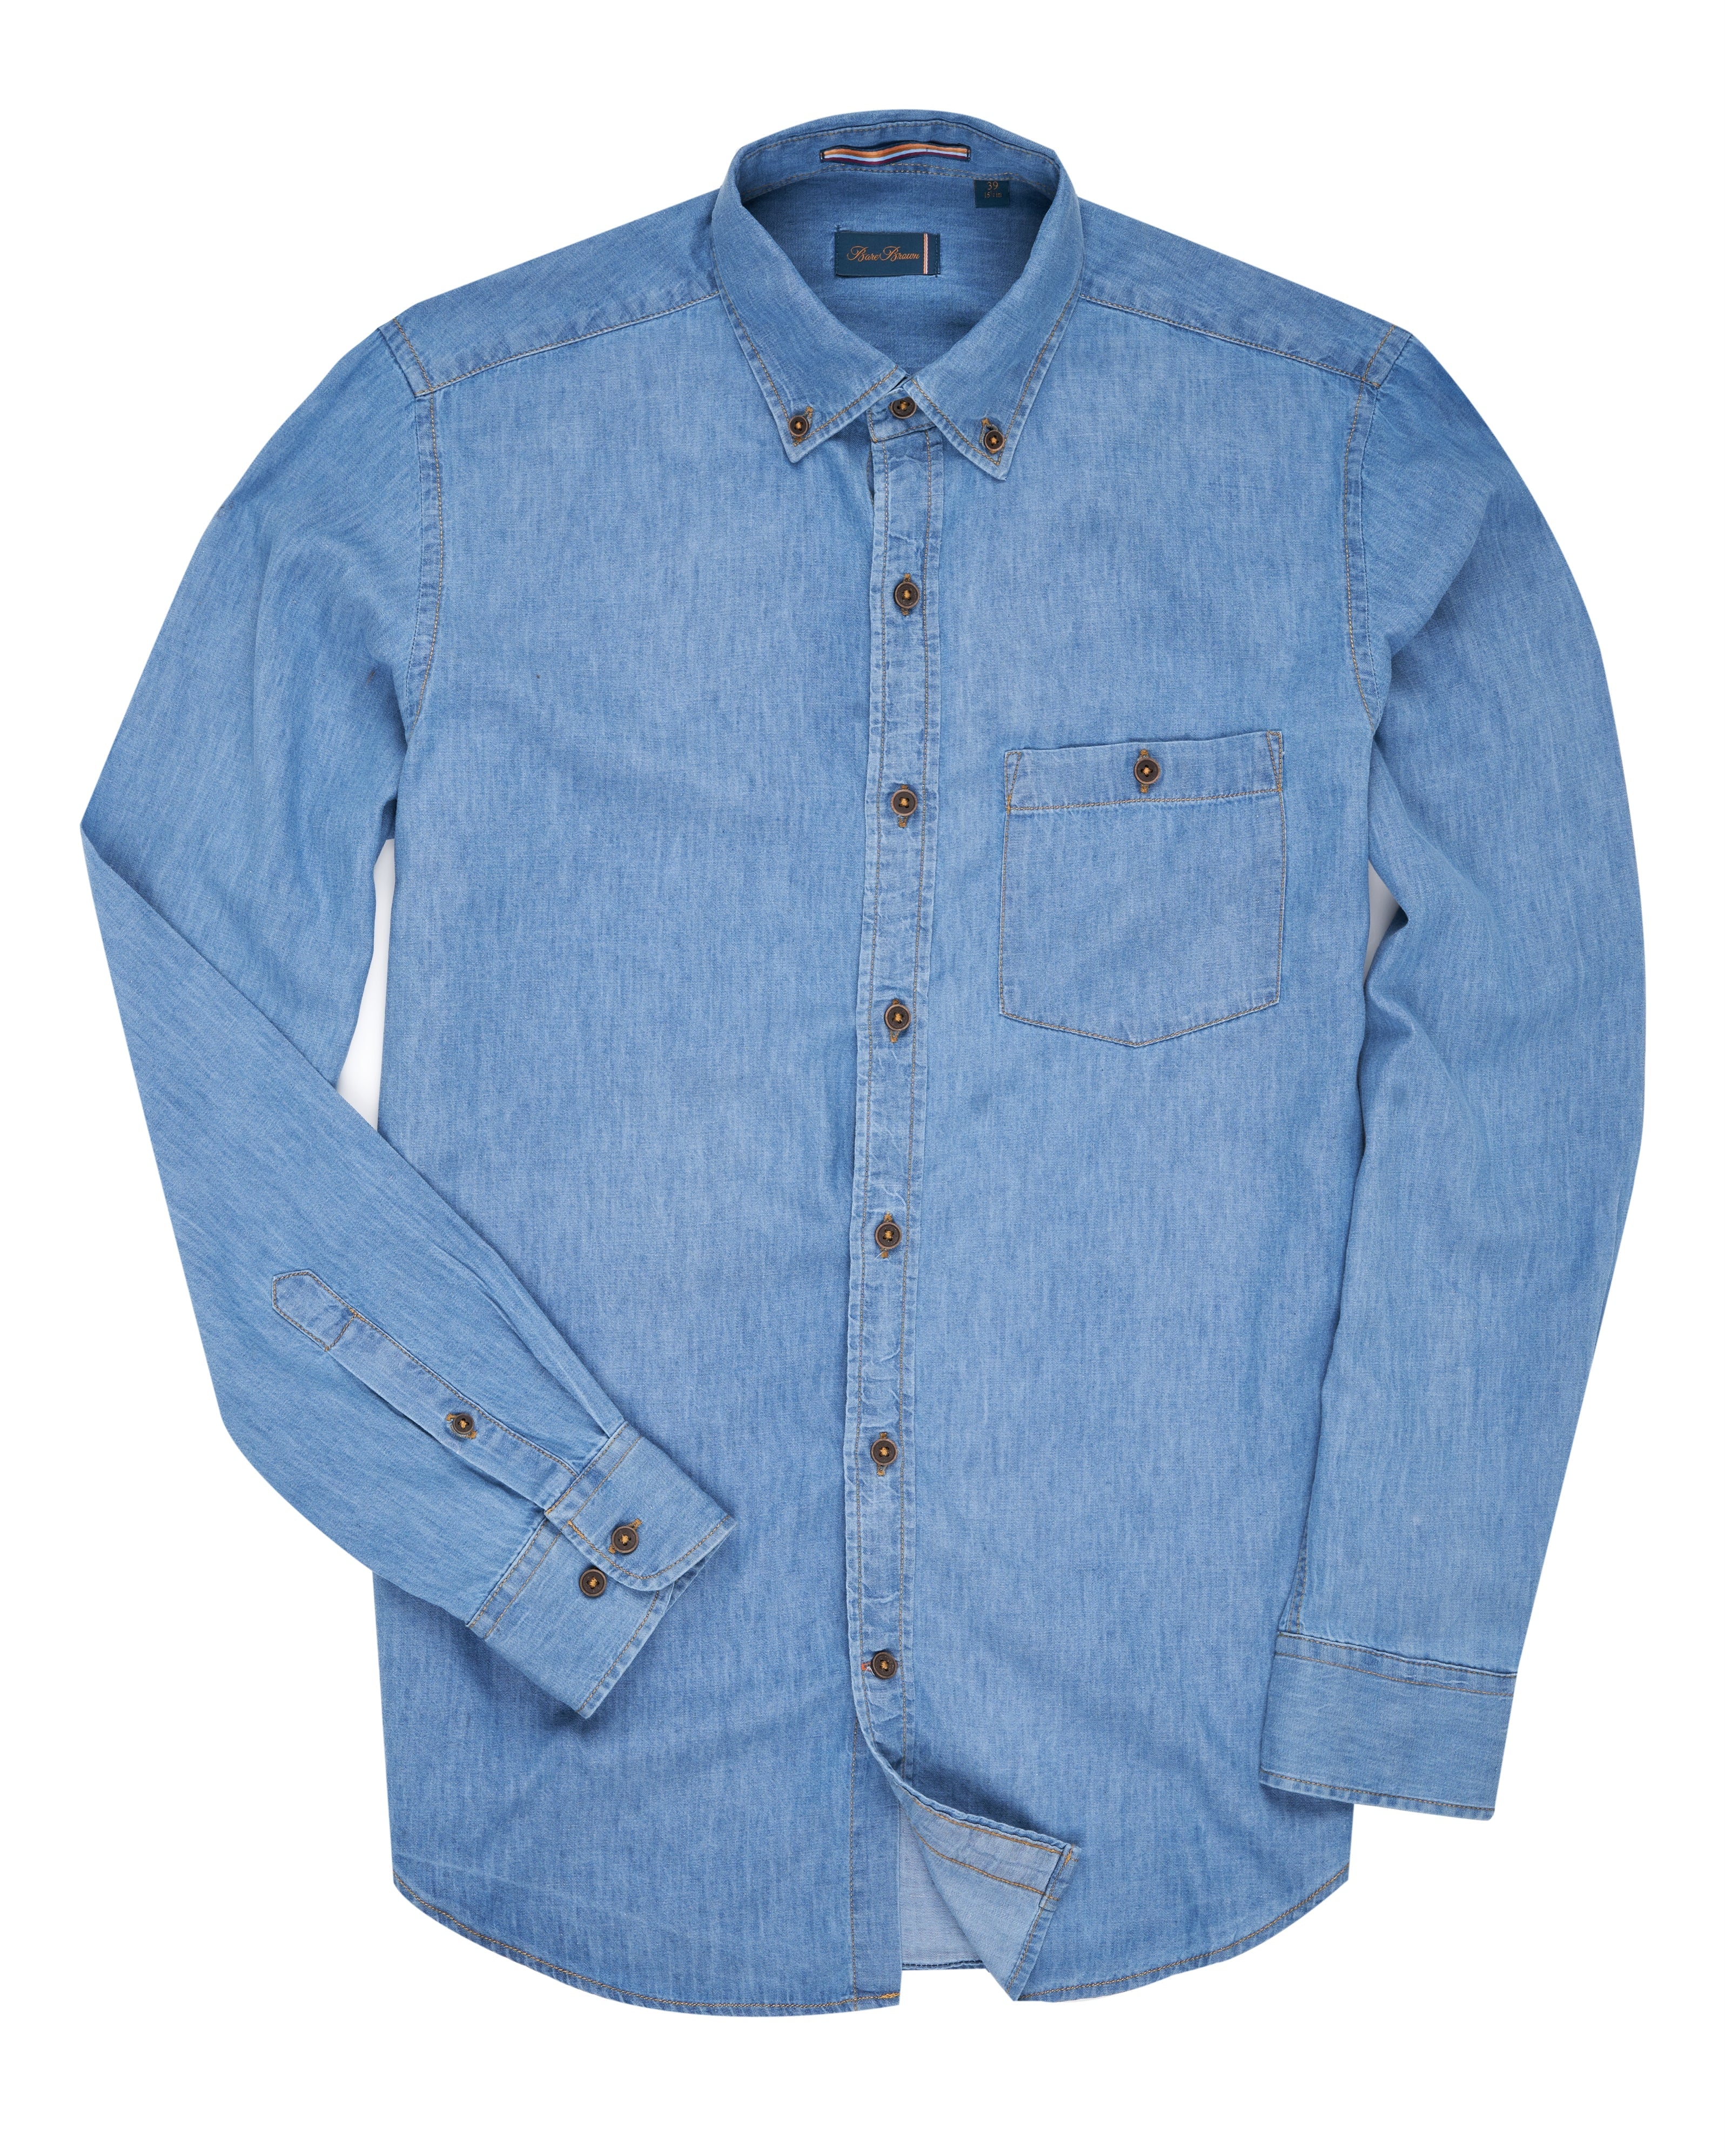 Bare Brown Cotton Denim Shirt, Slim Fit with Full Sleeves - Blue